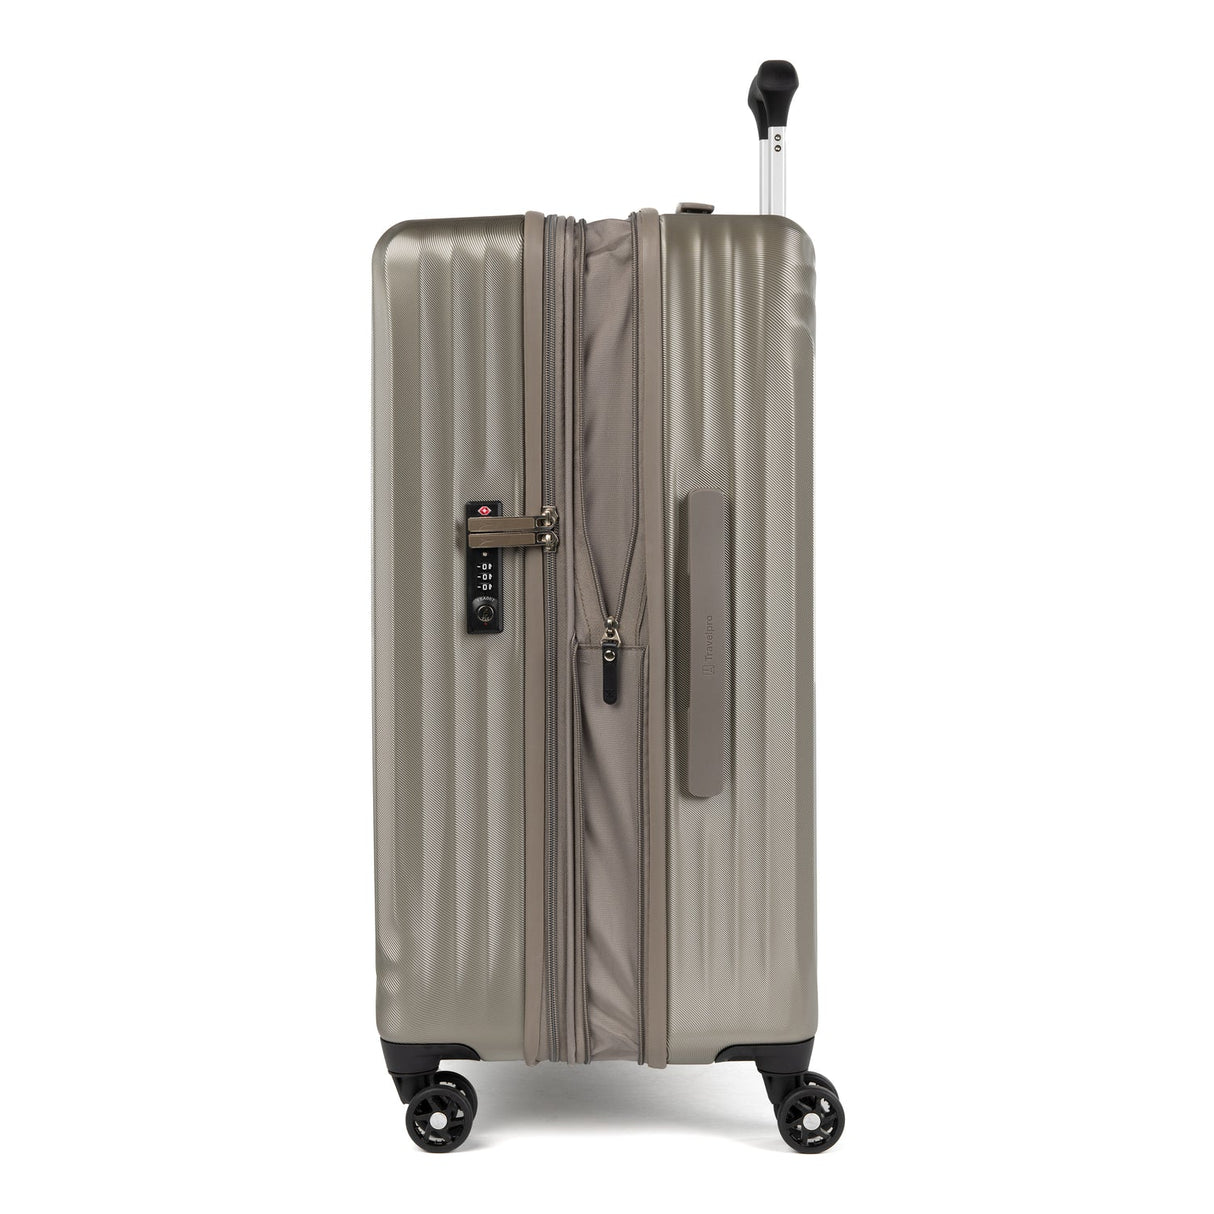 Travelpro Maxlite Air Medium Check-In Expandable Hardside Spinner , , 401229535_side2-1500x1500-d707c29_1024x1024_2x_14dbb141-3956-4bb4-86d4-aed5e93a6d9a